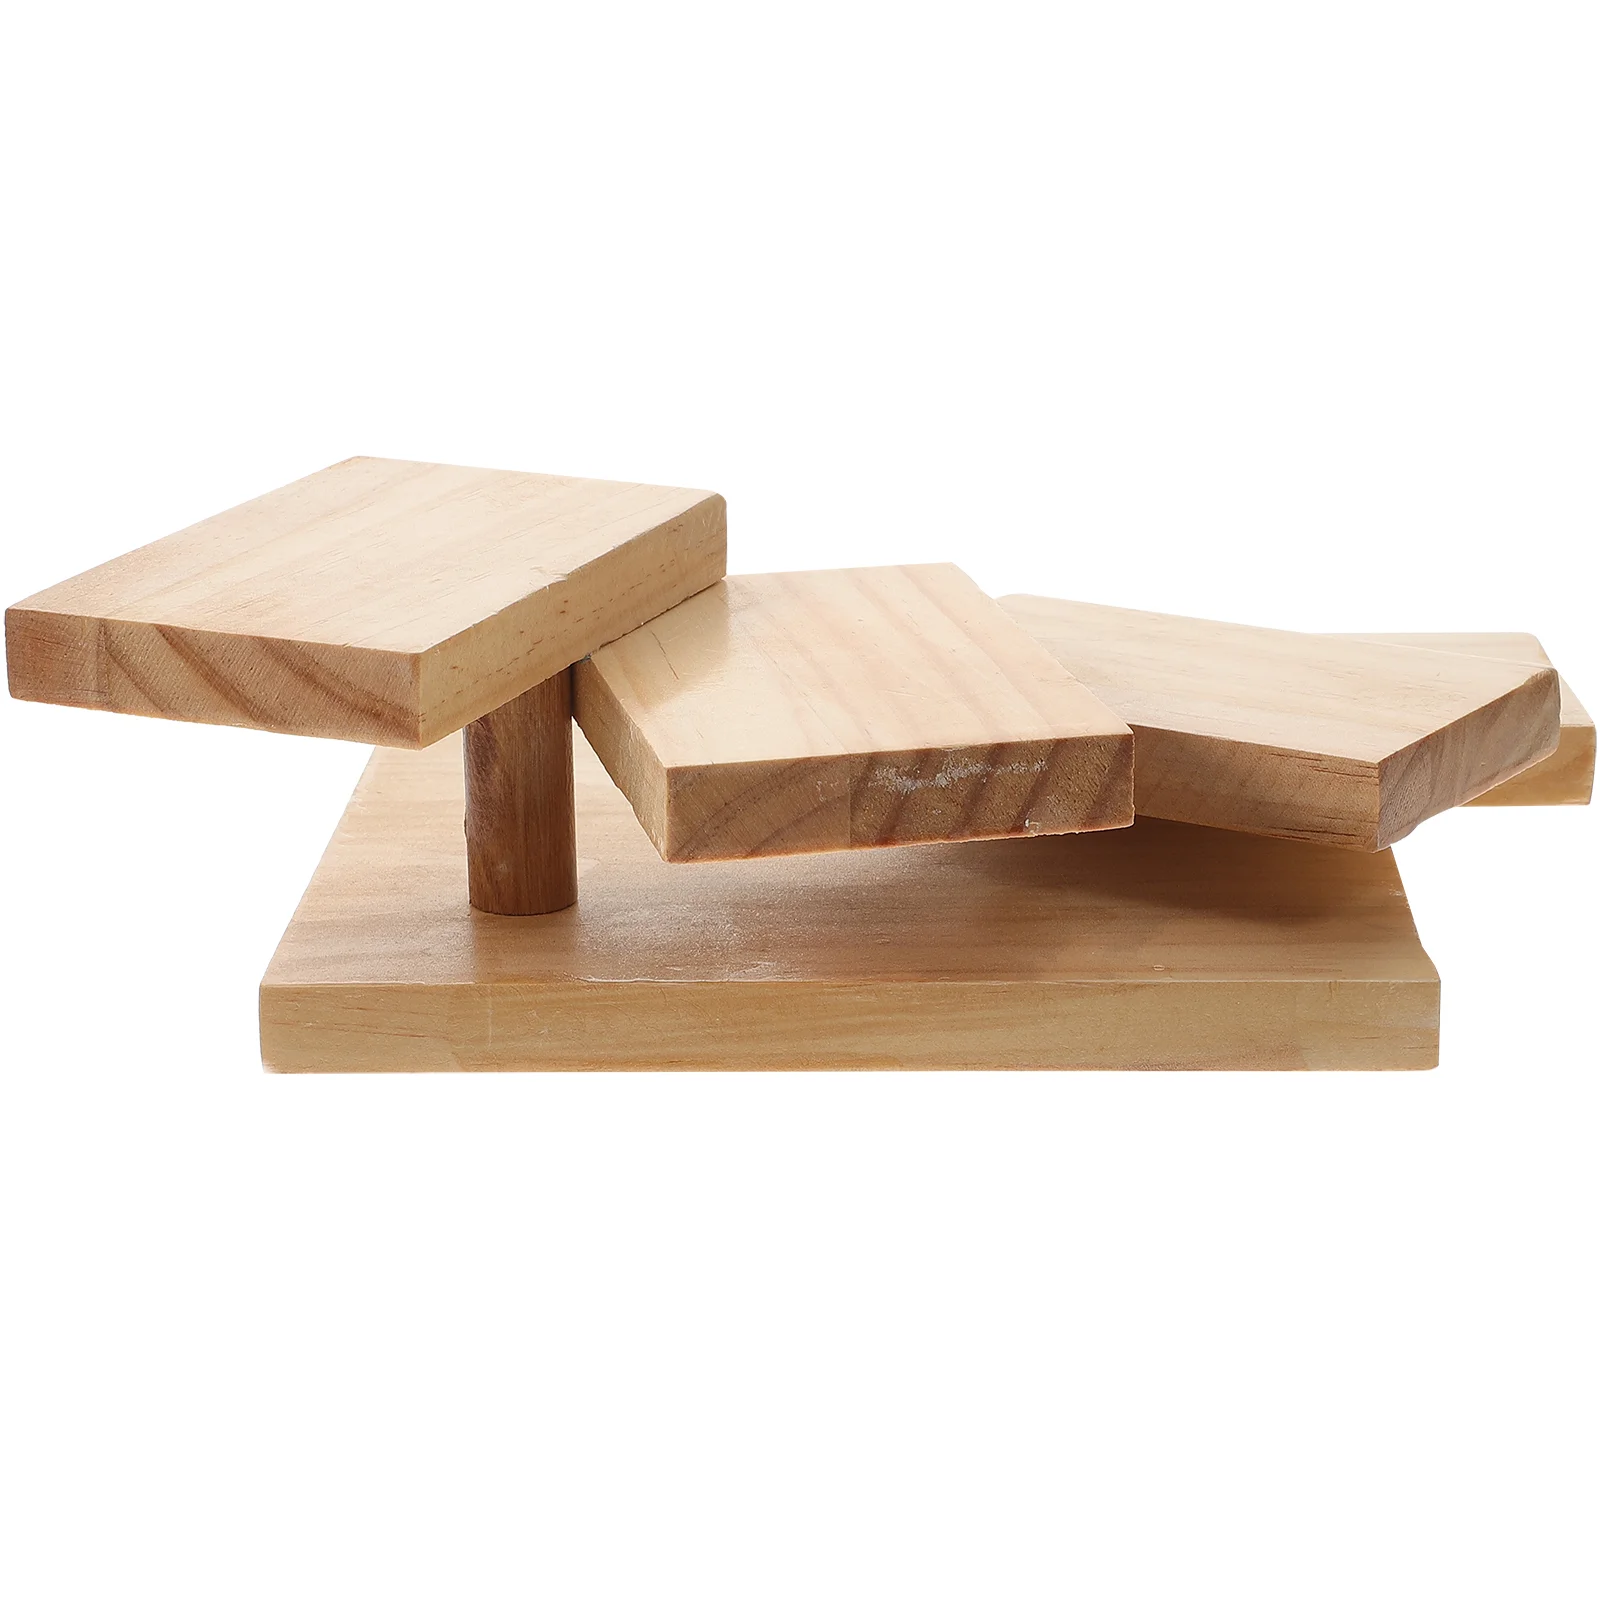 

Cheese Its Rotating Sushi Plate Cake Platters Sauce Condiment Tray Drinks Accessory Wood Appetizer Plates Boat